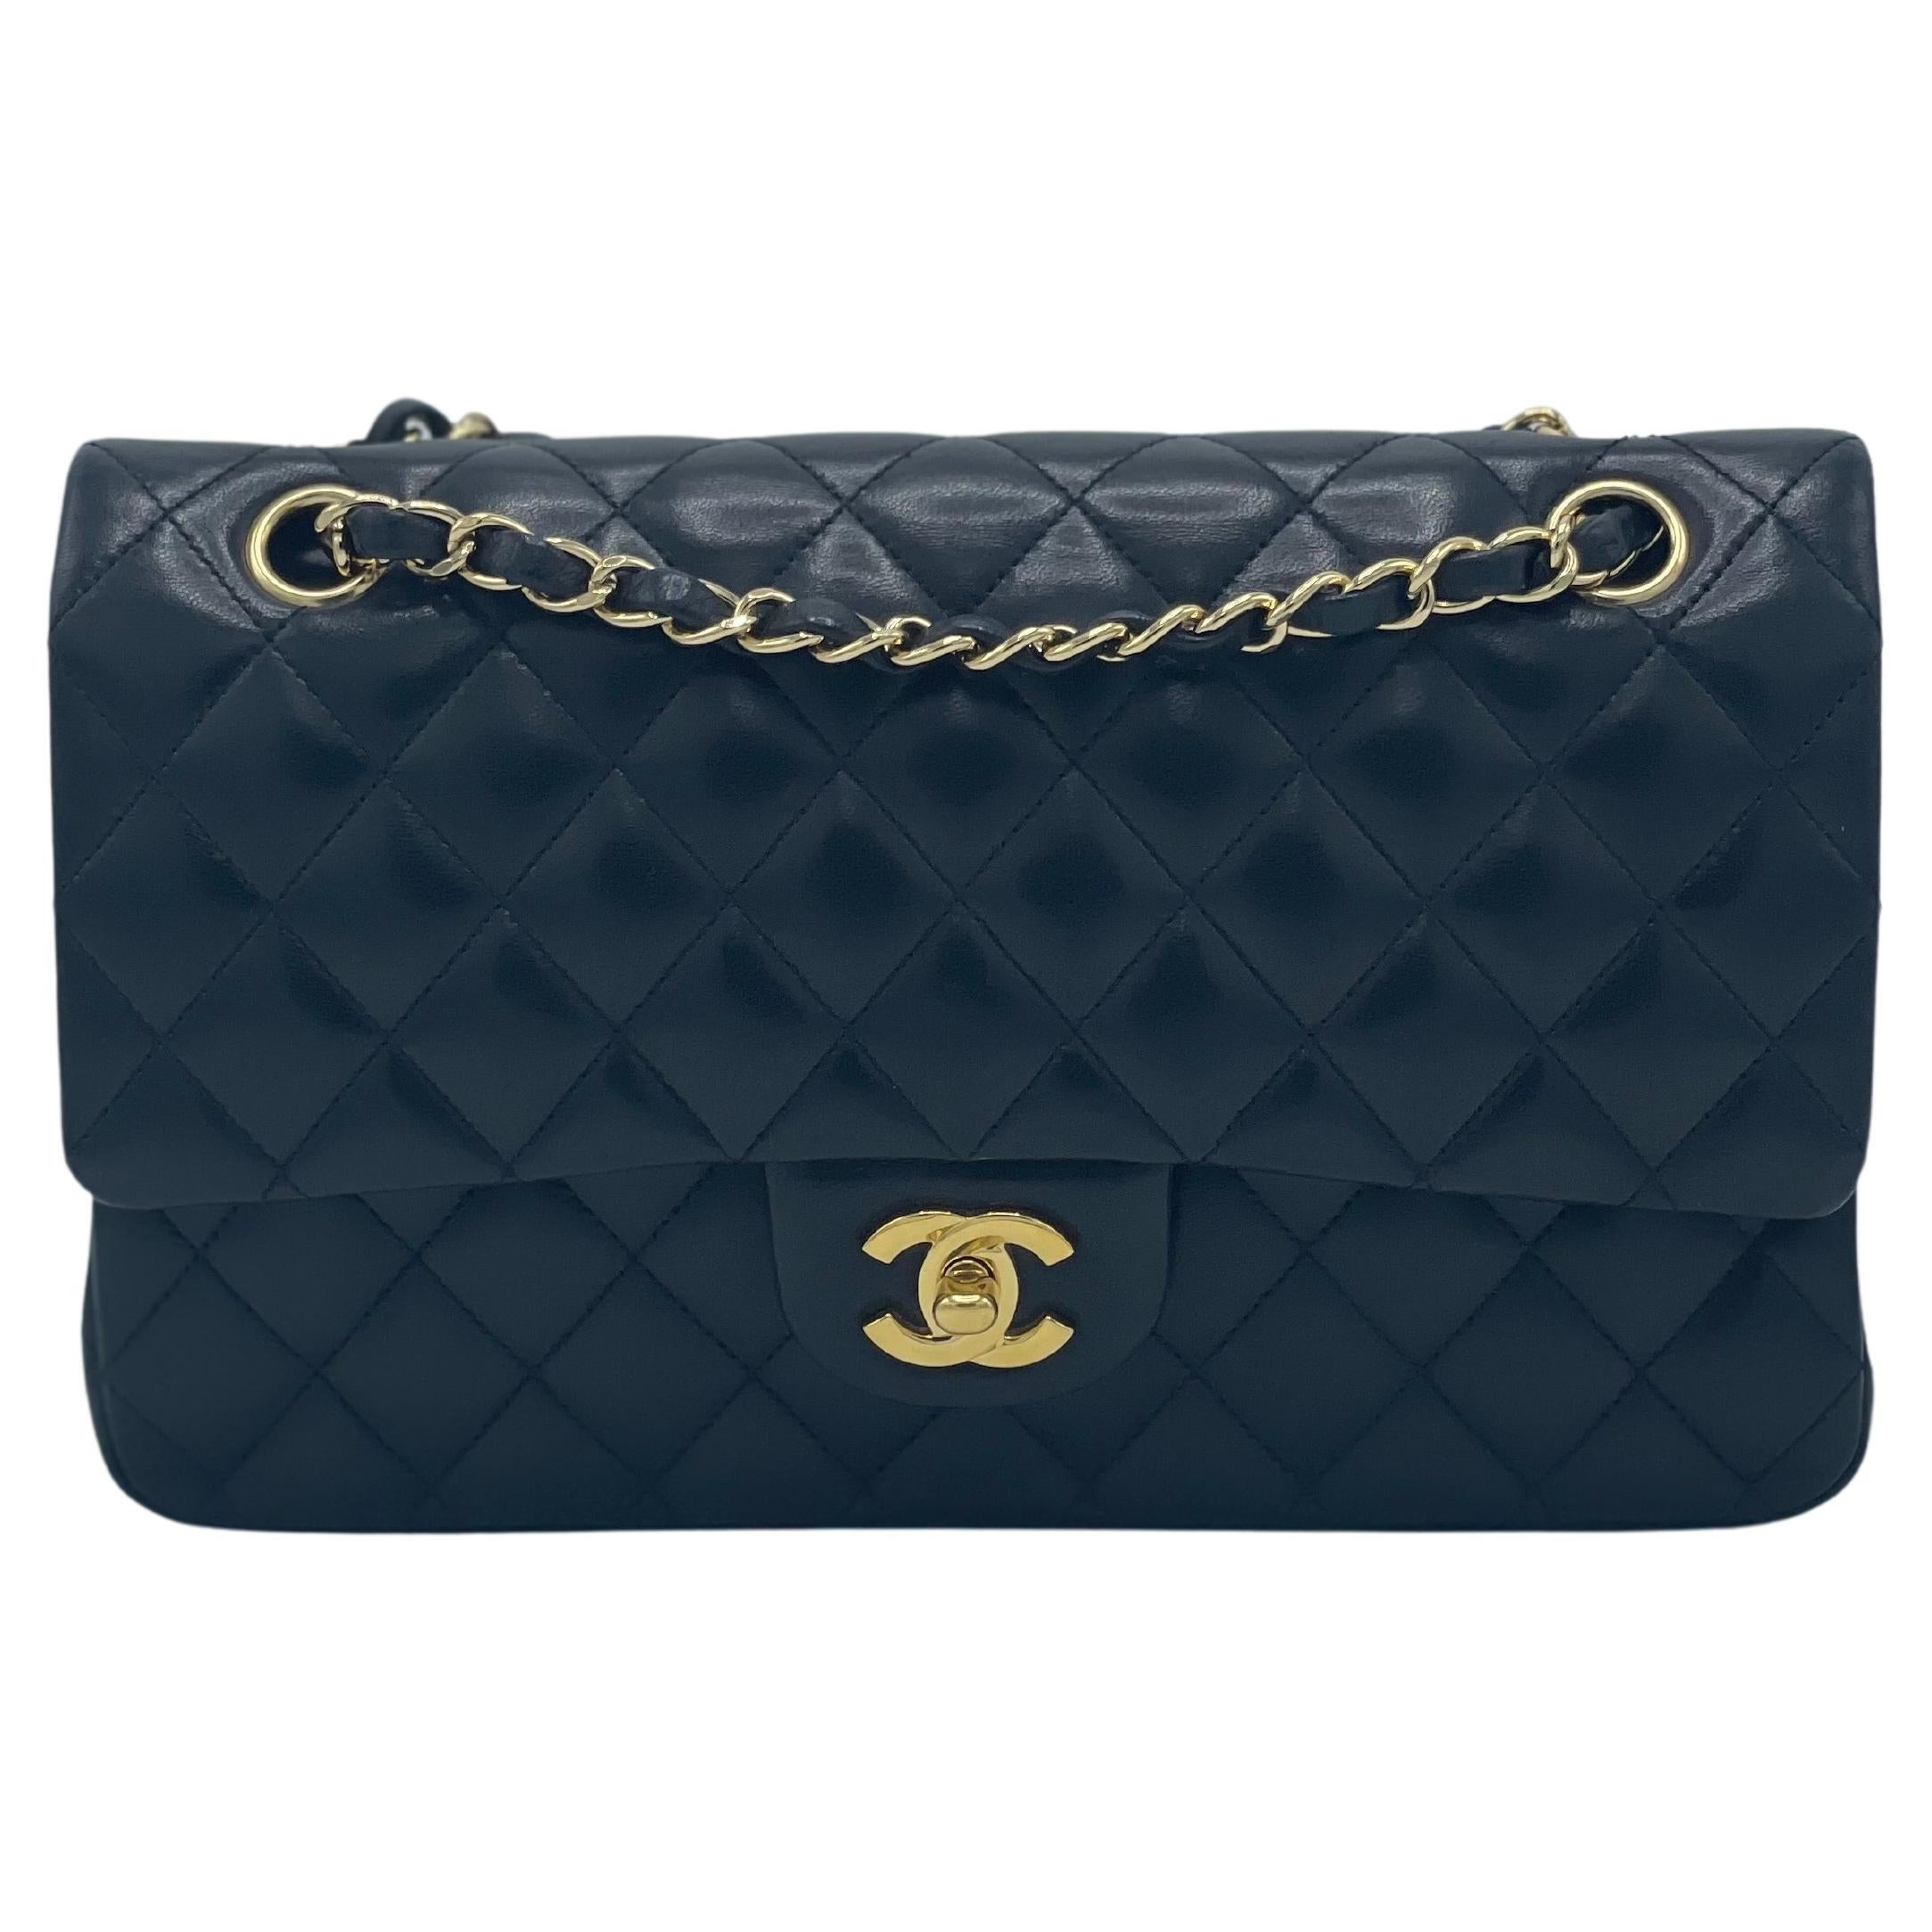 The famous Chanel Classic Double Flap new model shoulder bag is created in black diamond-quilted lambskin leather and adorned with gold-tone turnlock and chain hardware . 
The bag has a polished gold leather-threaded chain-link shoulder strap, a